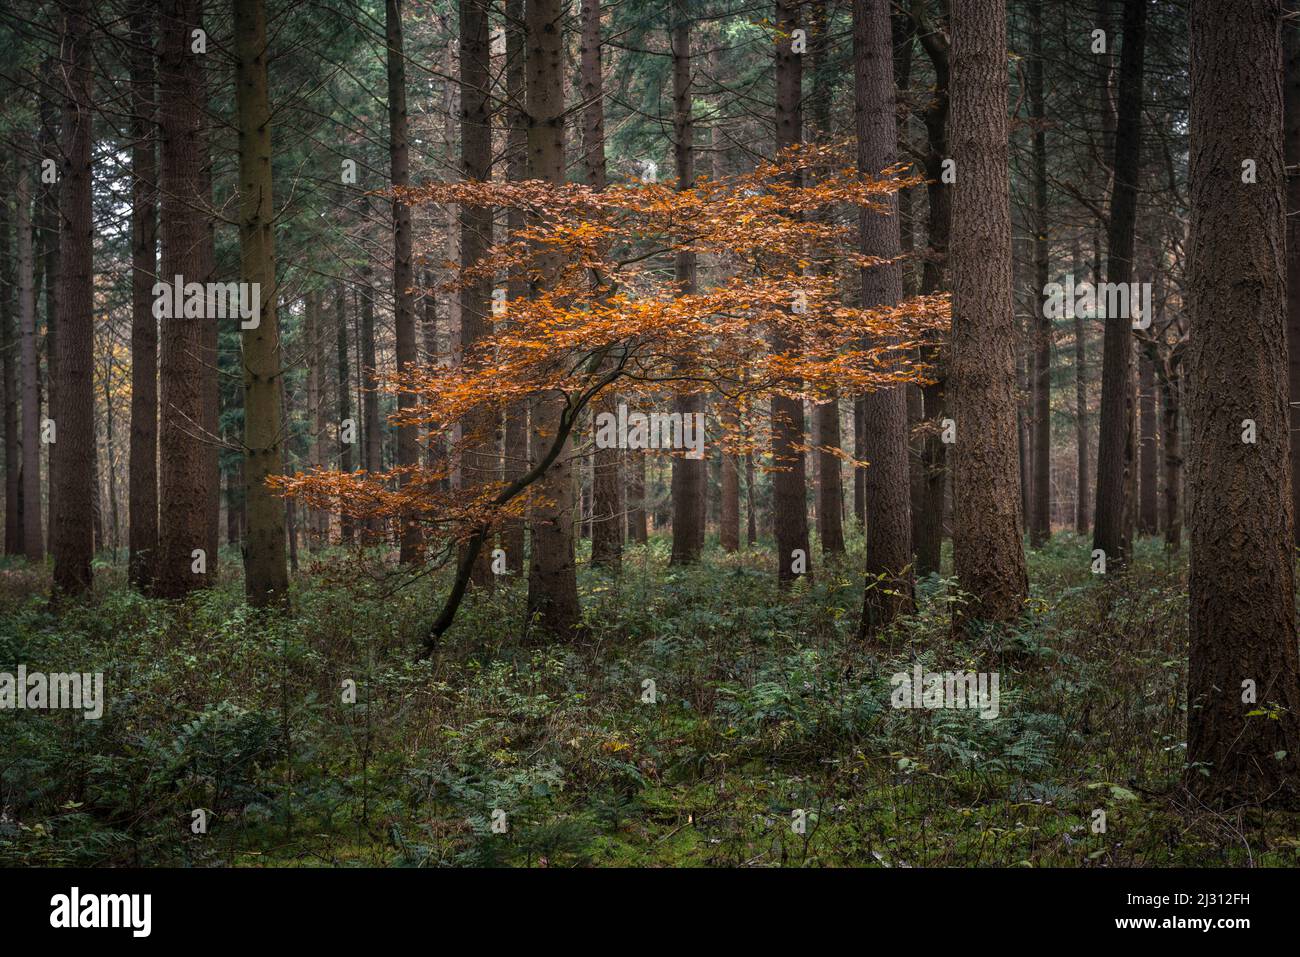 Beech trees between conifers in the Baumweg primeval forest, Ahlhorn, Lower Saxony, Germany, Europe Stock Photo